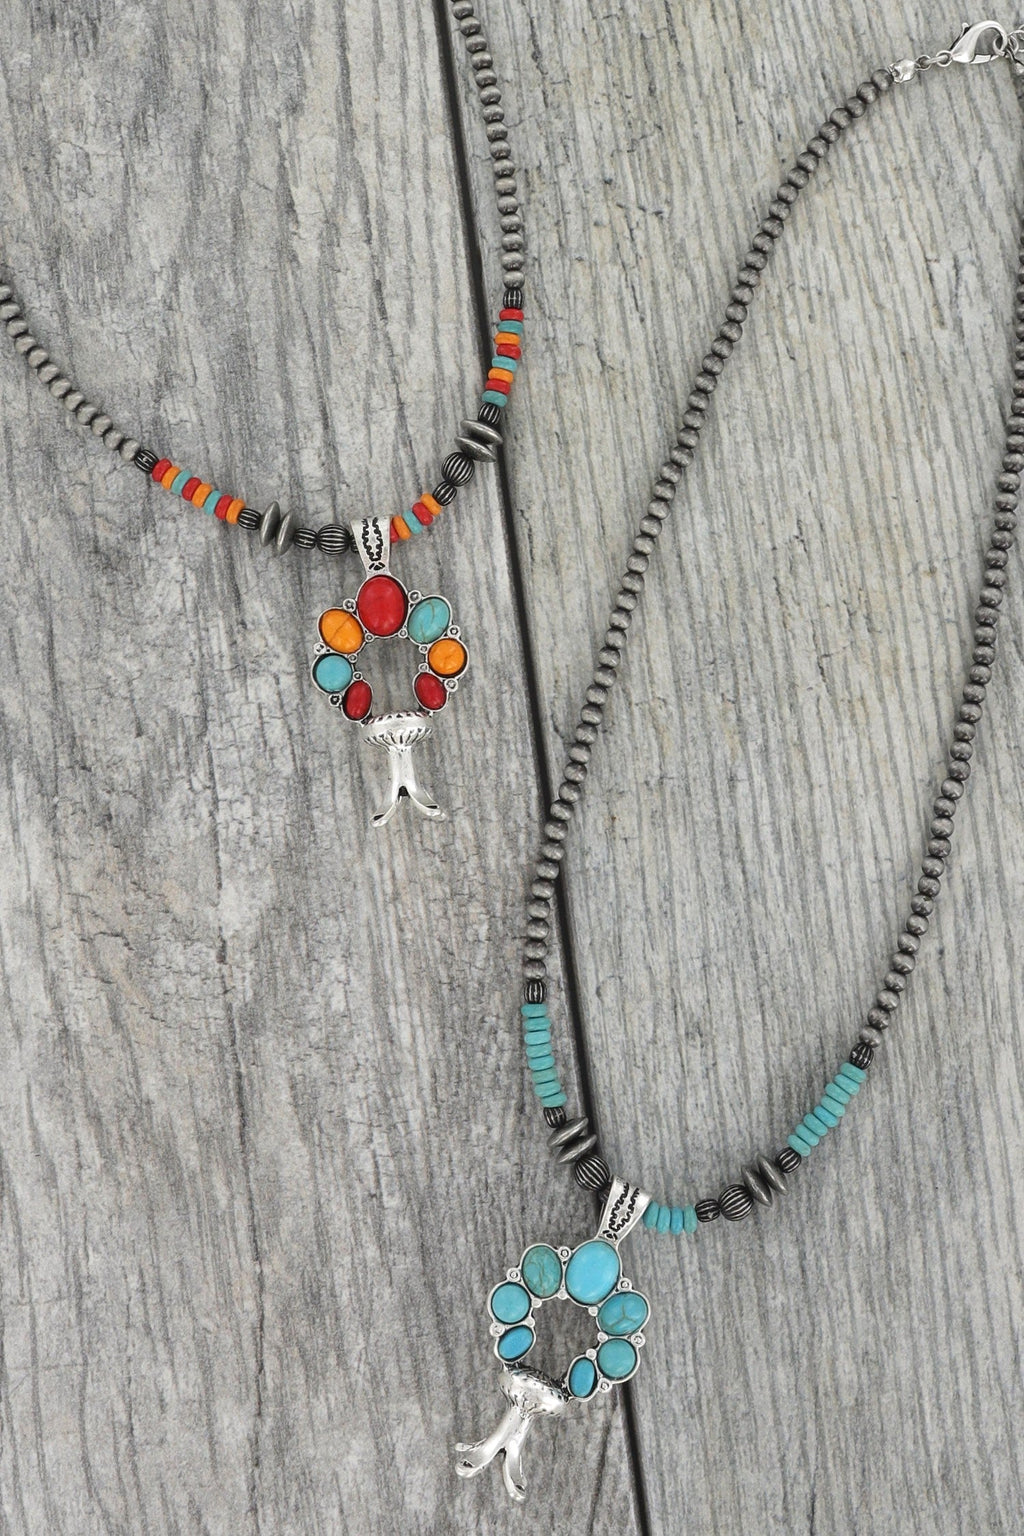 WESTERN SYNTHETIC SEMI STONE SQUASH BLOSSOM NAVAJO BEADED ADJUSTABLE PENDANT NECKLACE IN SILVER TONE METAL LENGTH: 18" EXTENSION: 3" DROP: 2” 